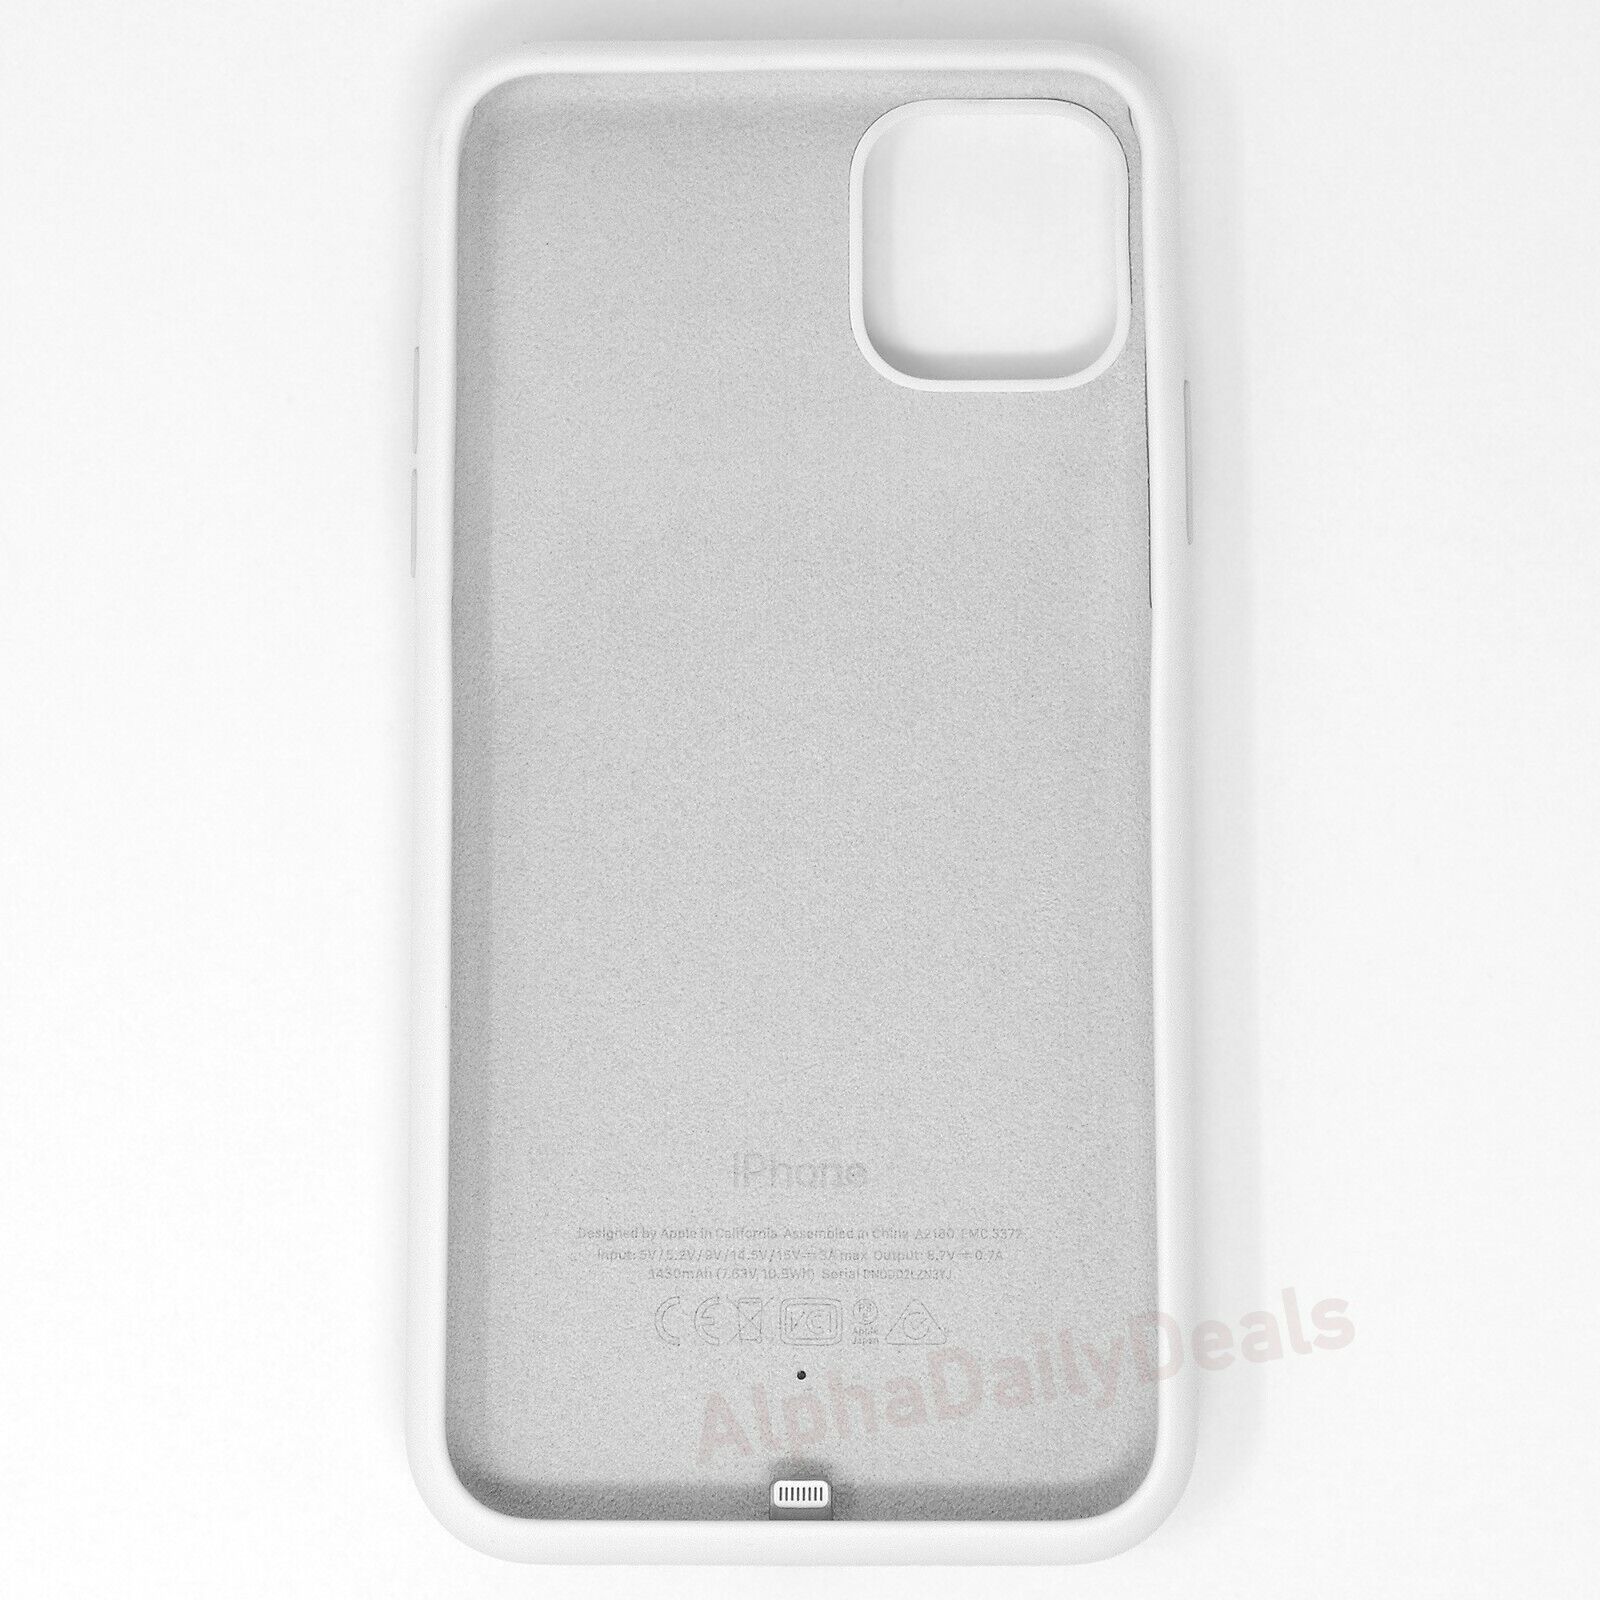 Genuine Apple iPhone 11 PRO MAX Smart Battery Case White NEW SEALED